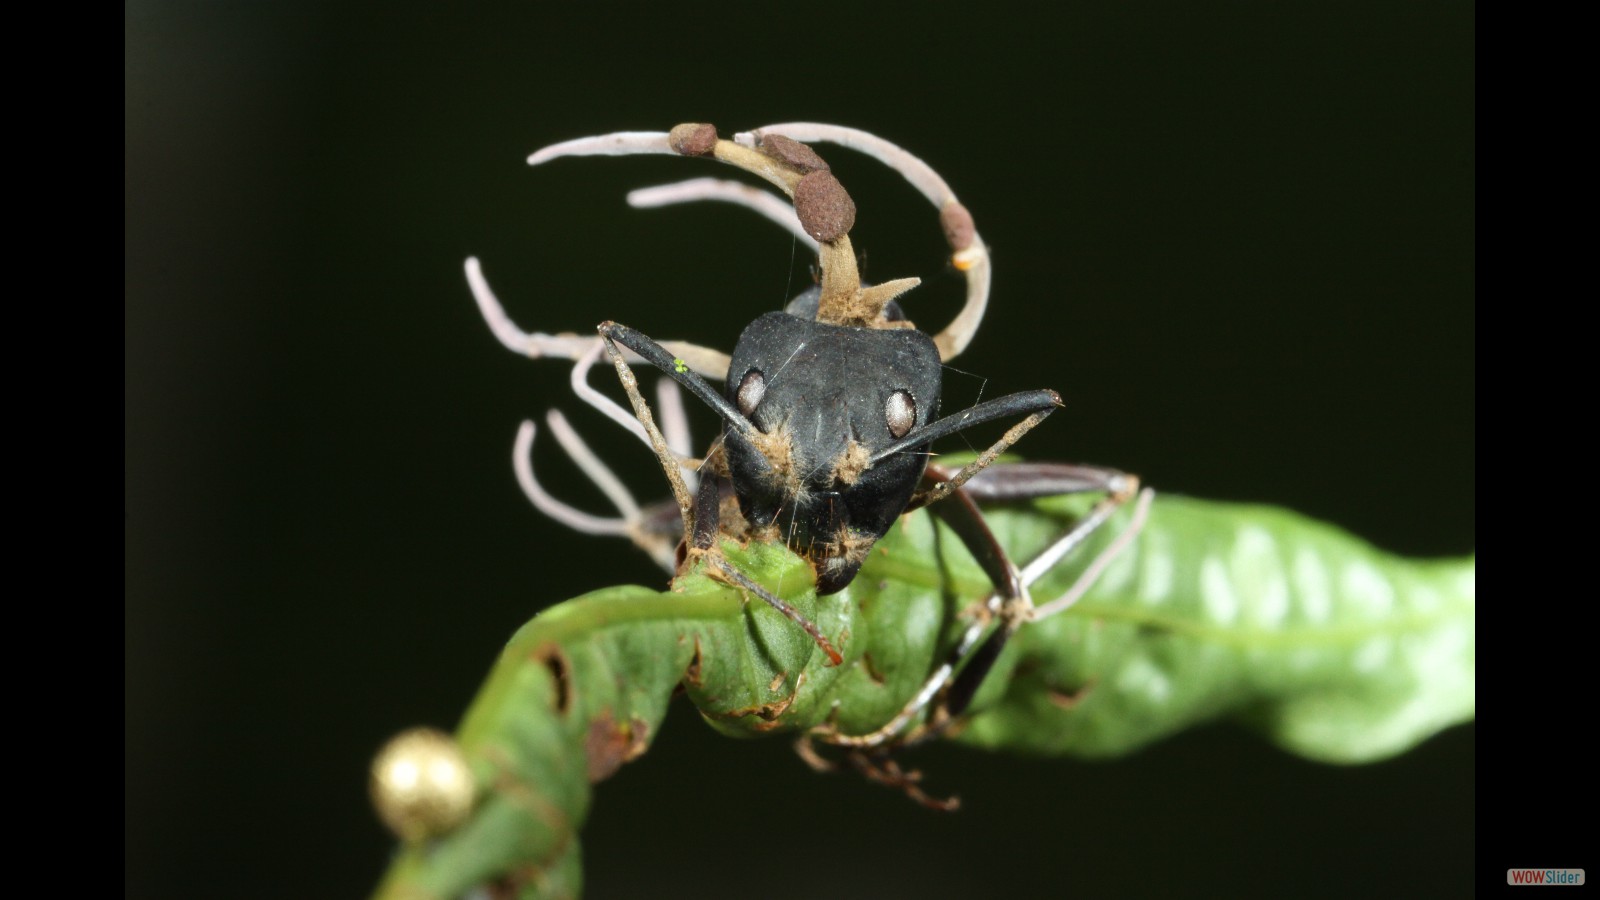 A carpenter ant killed by the Ophiocordyceps fungus.